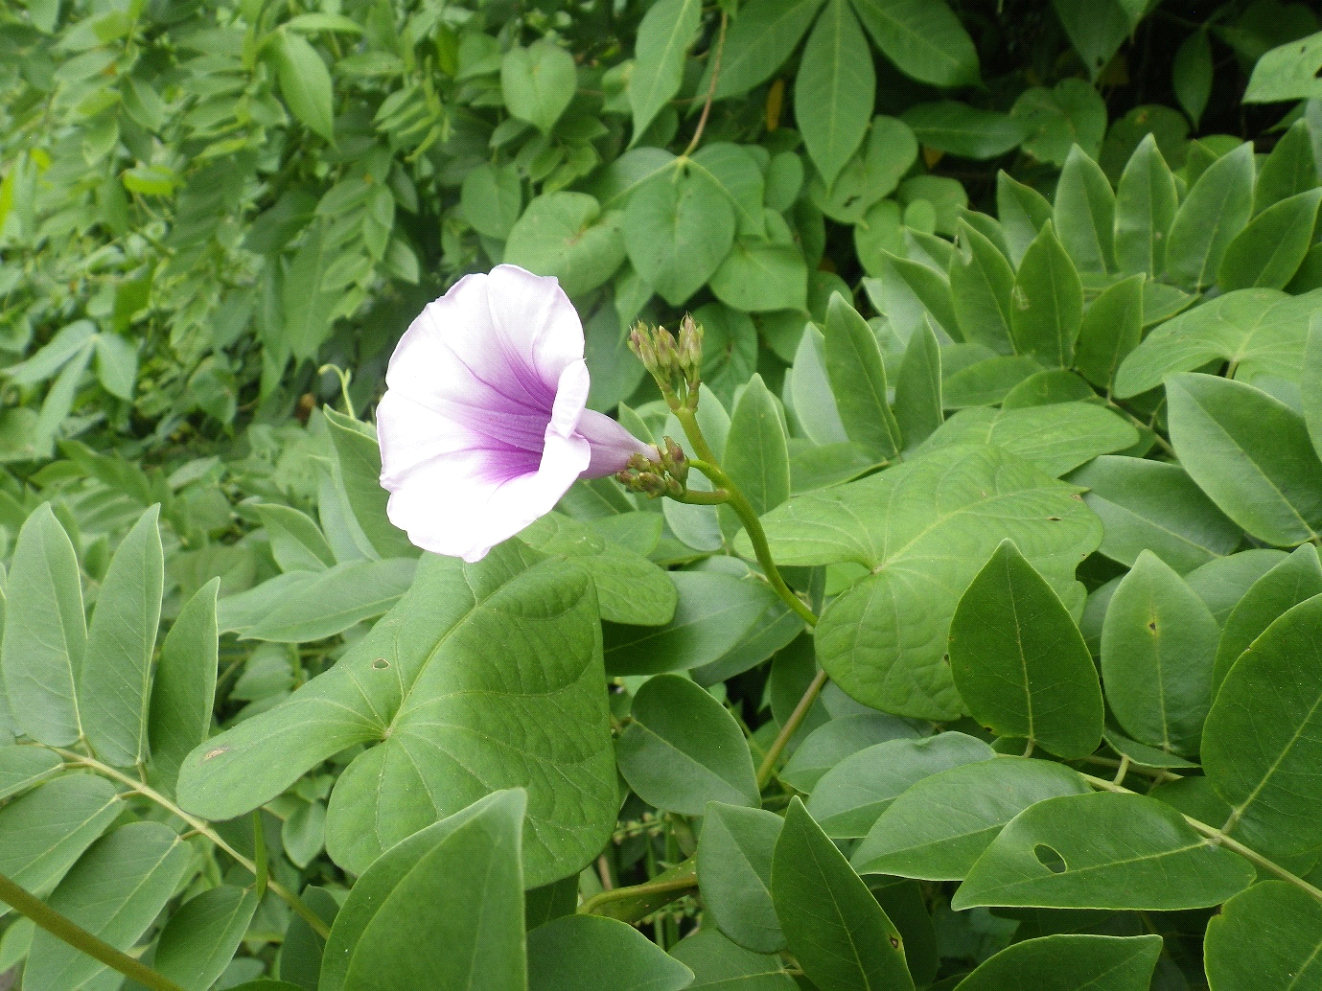 Among a sea of dense green leaves, a large bell shaped flower of the plant emerges, towering above the leafage.